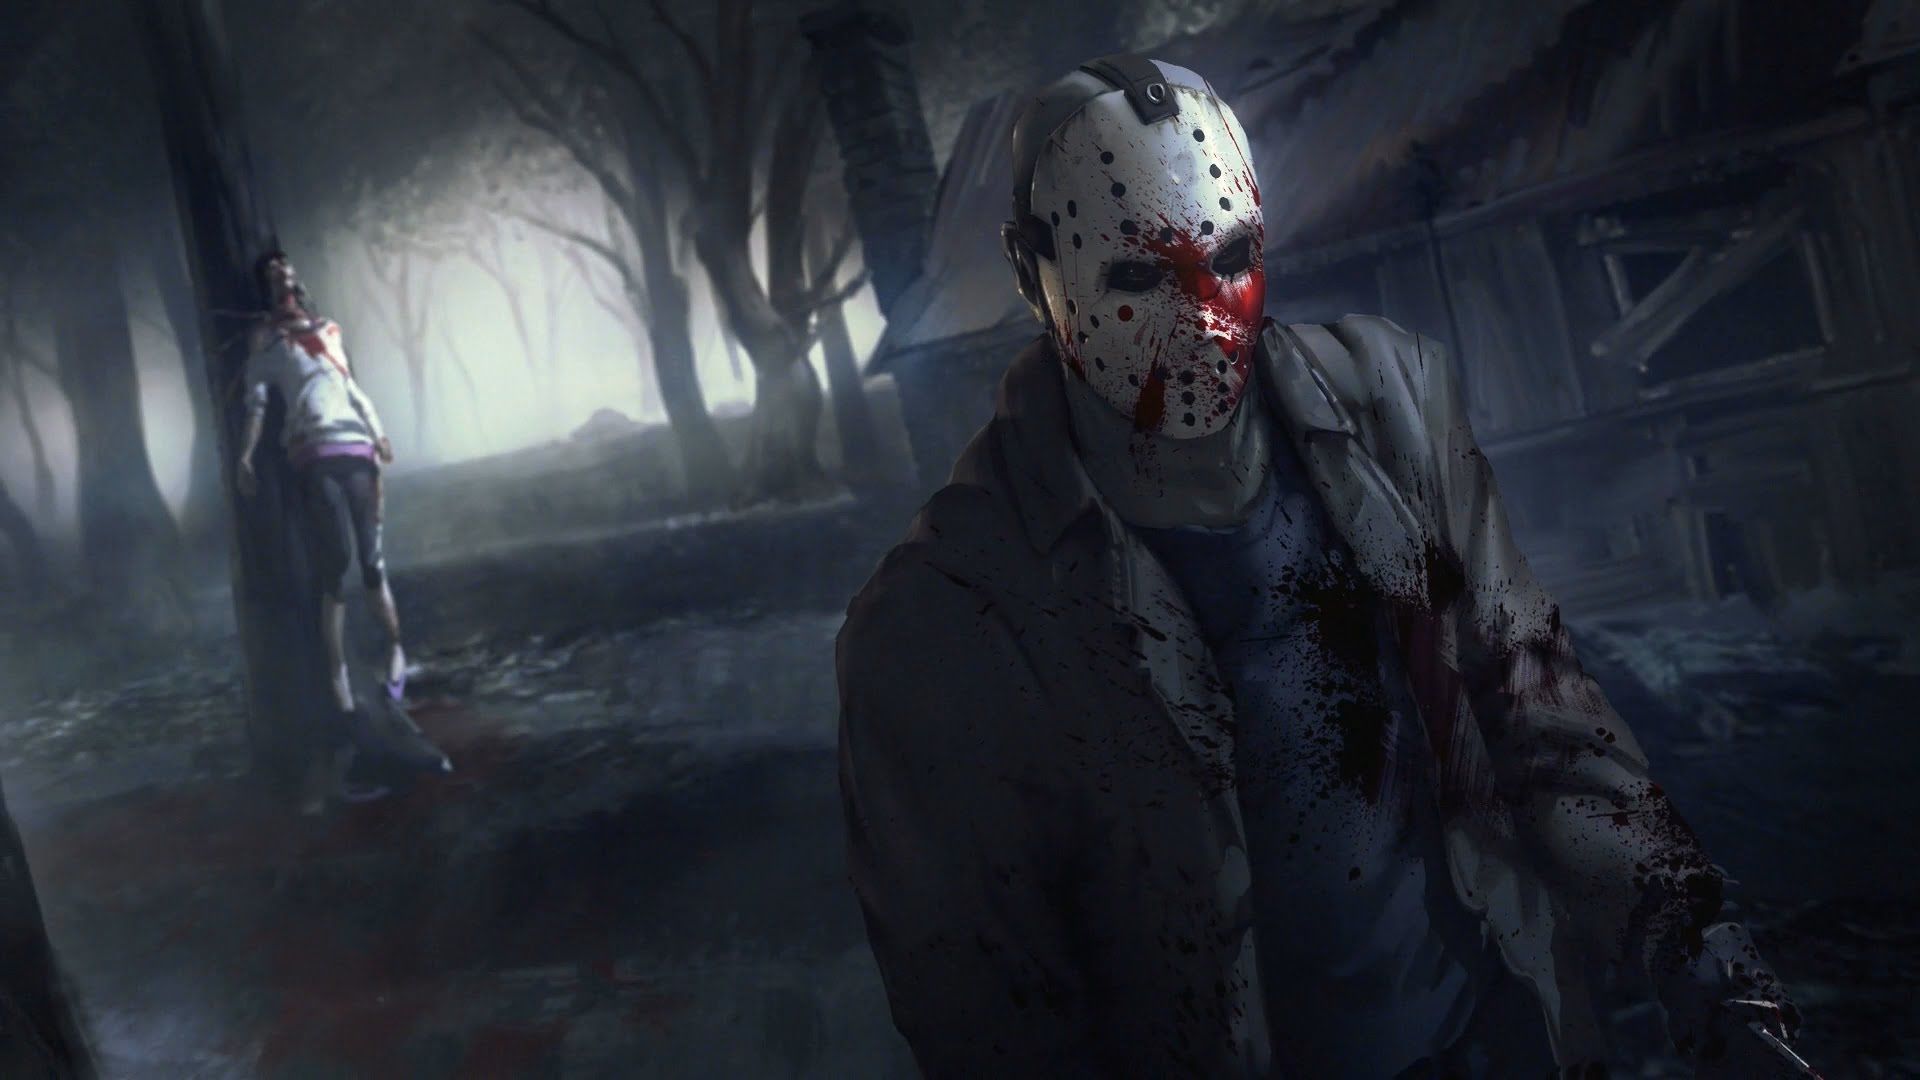 Friday The 13th: The Game HD wallpapers, Desktop wallpaper - most viewed